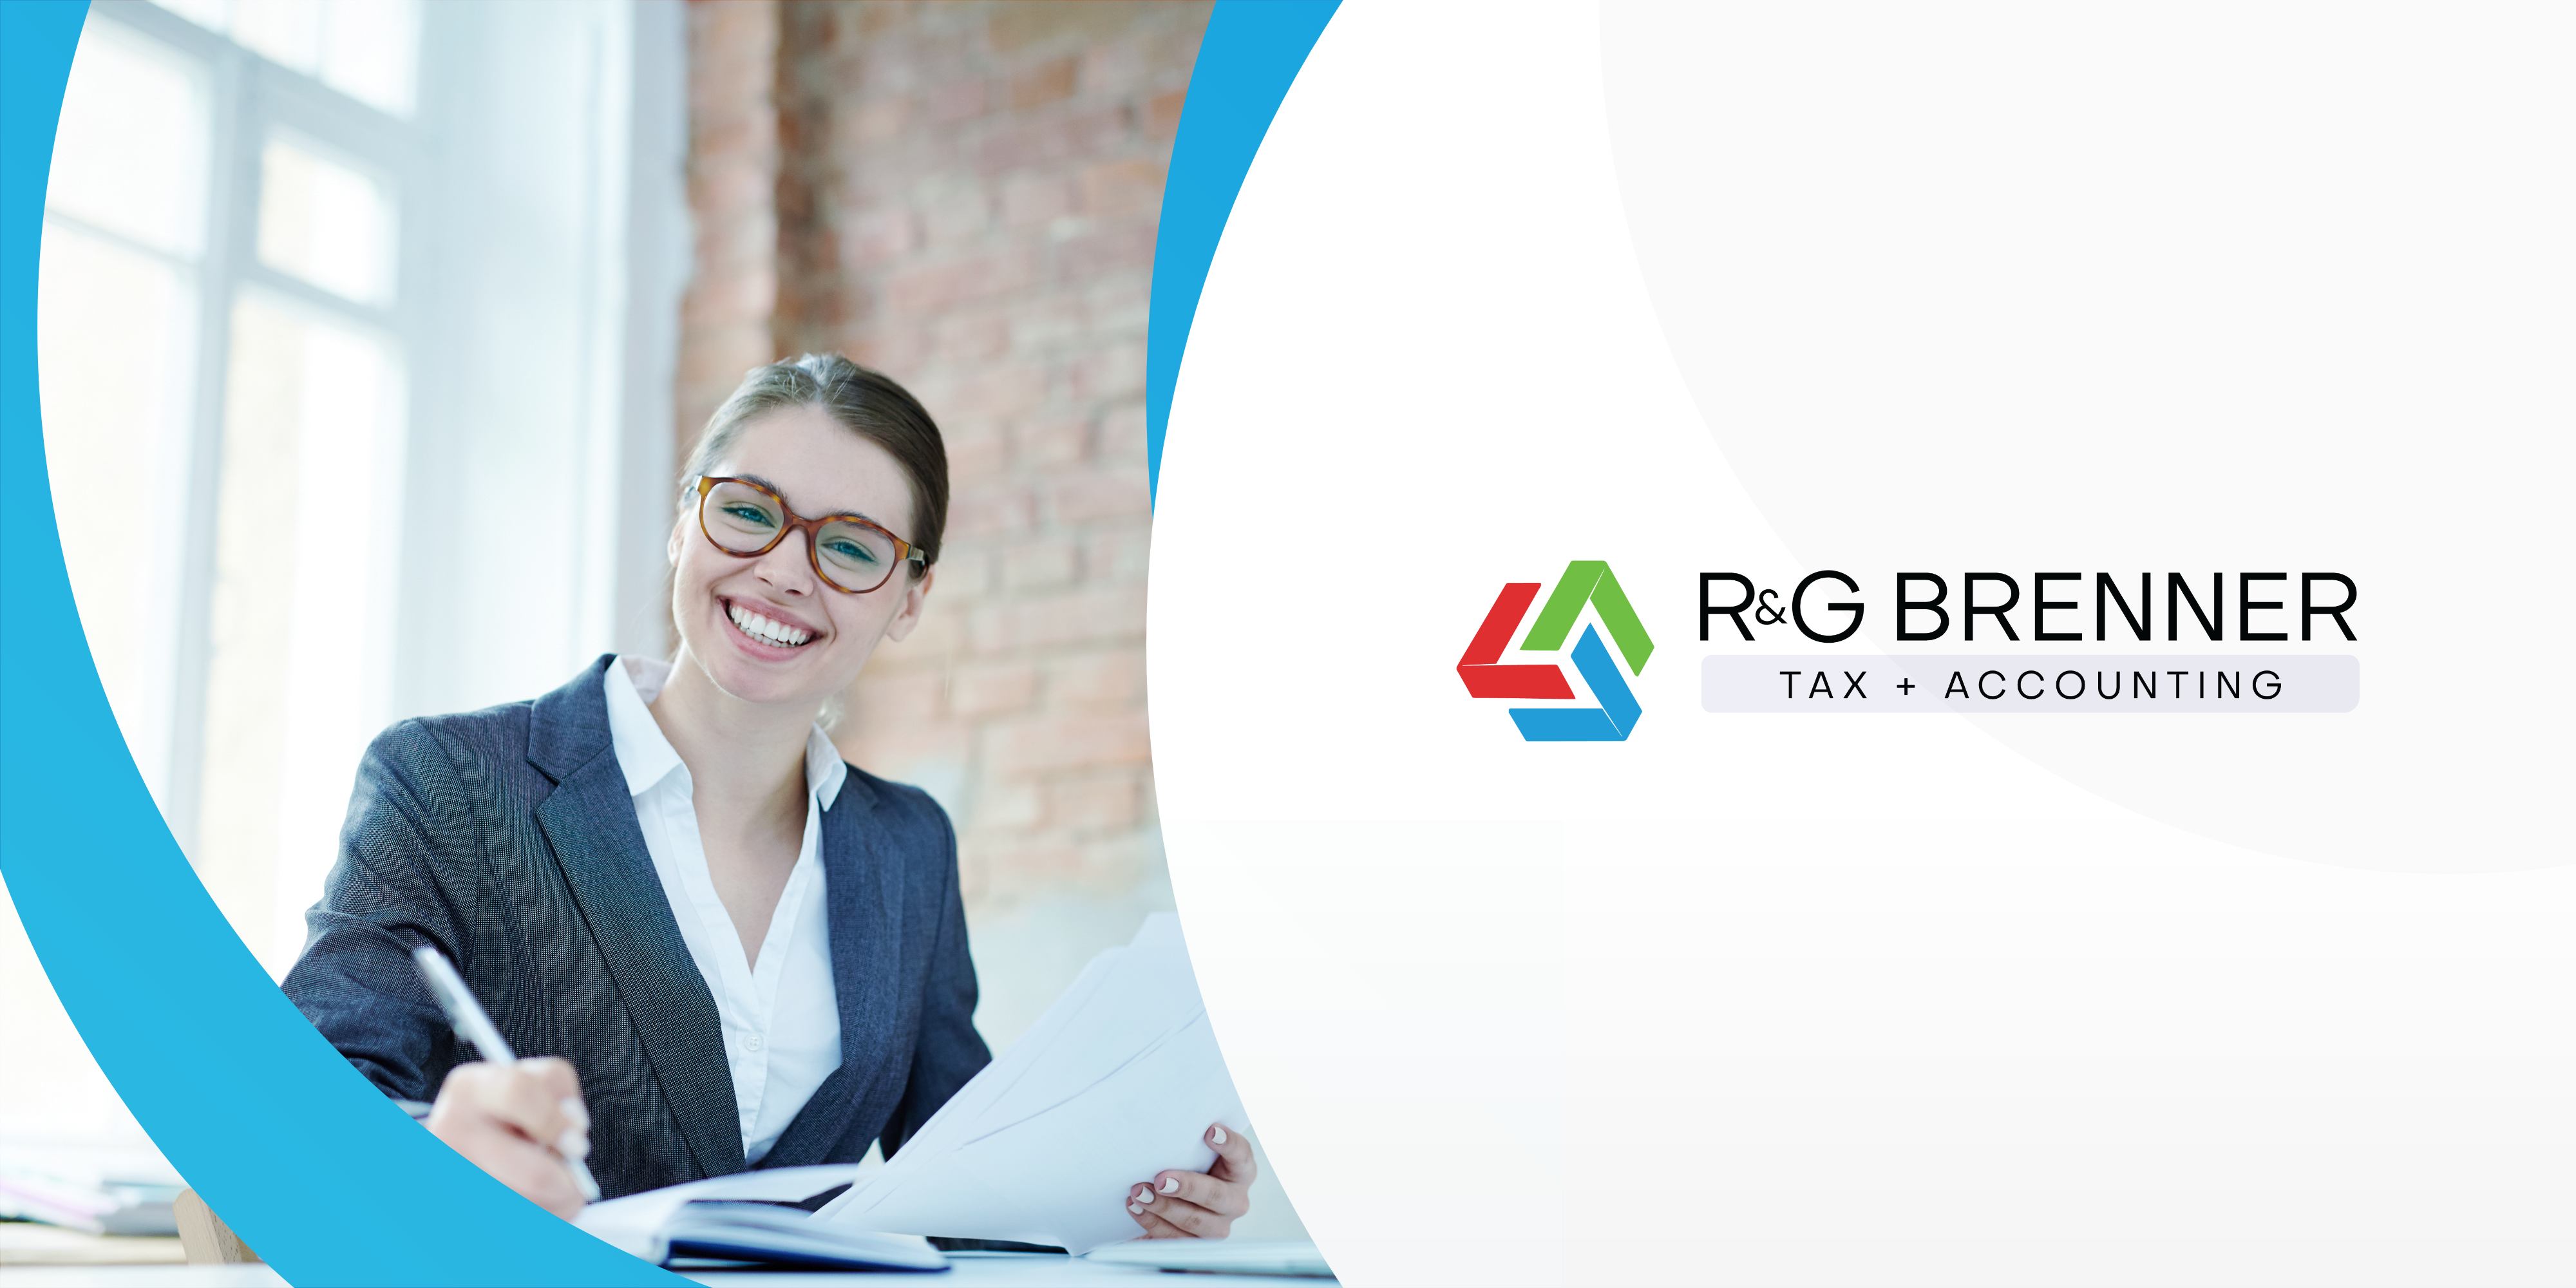 Image of businesswoman reviewing documents and smiling towards the camera. To the right of the image is the R&G Brenner logo on a white background.